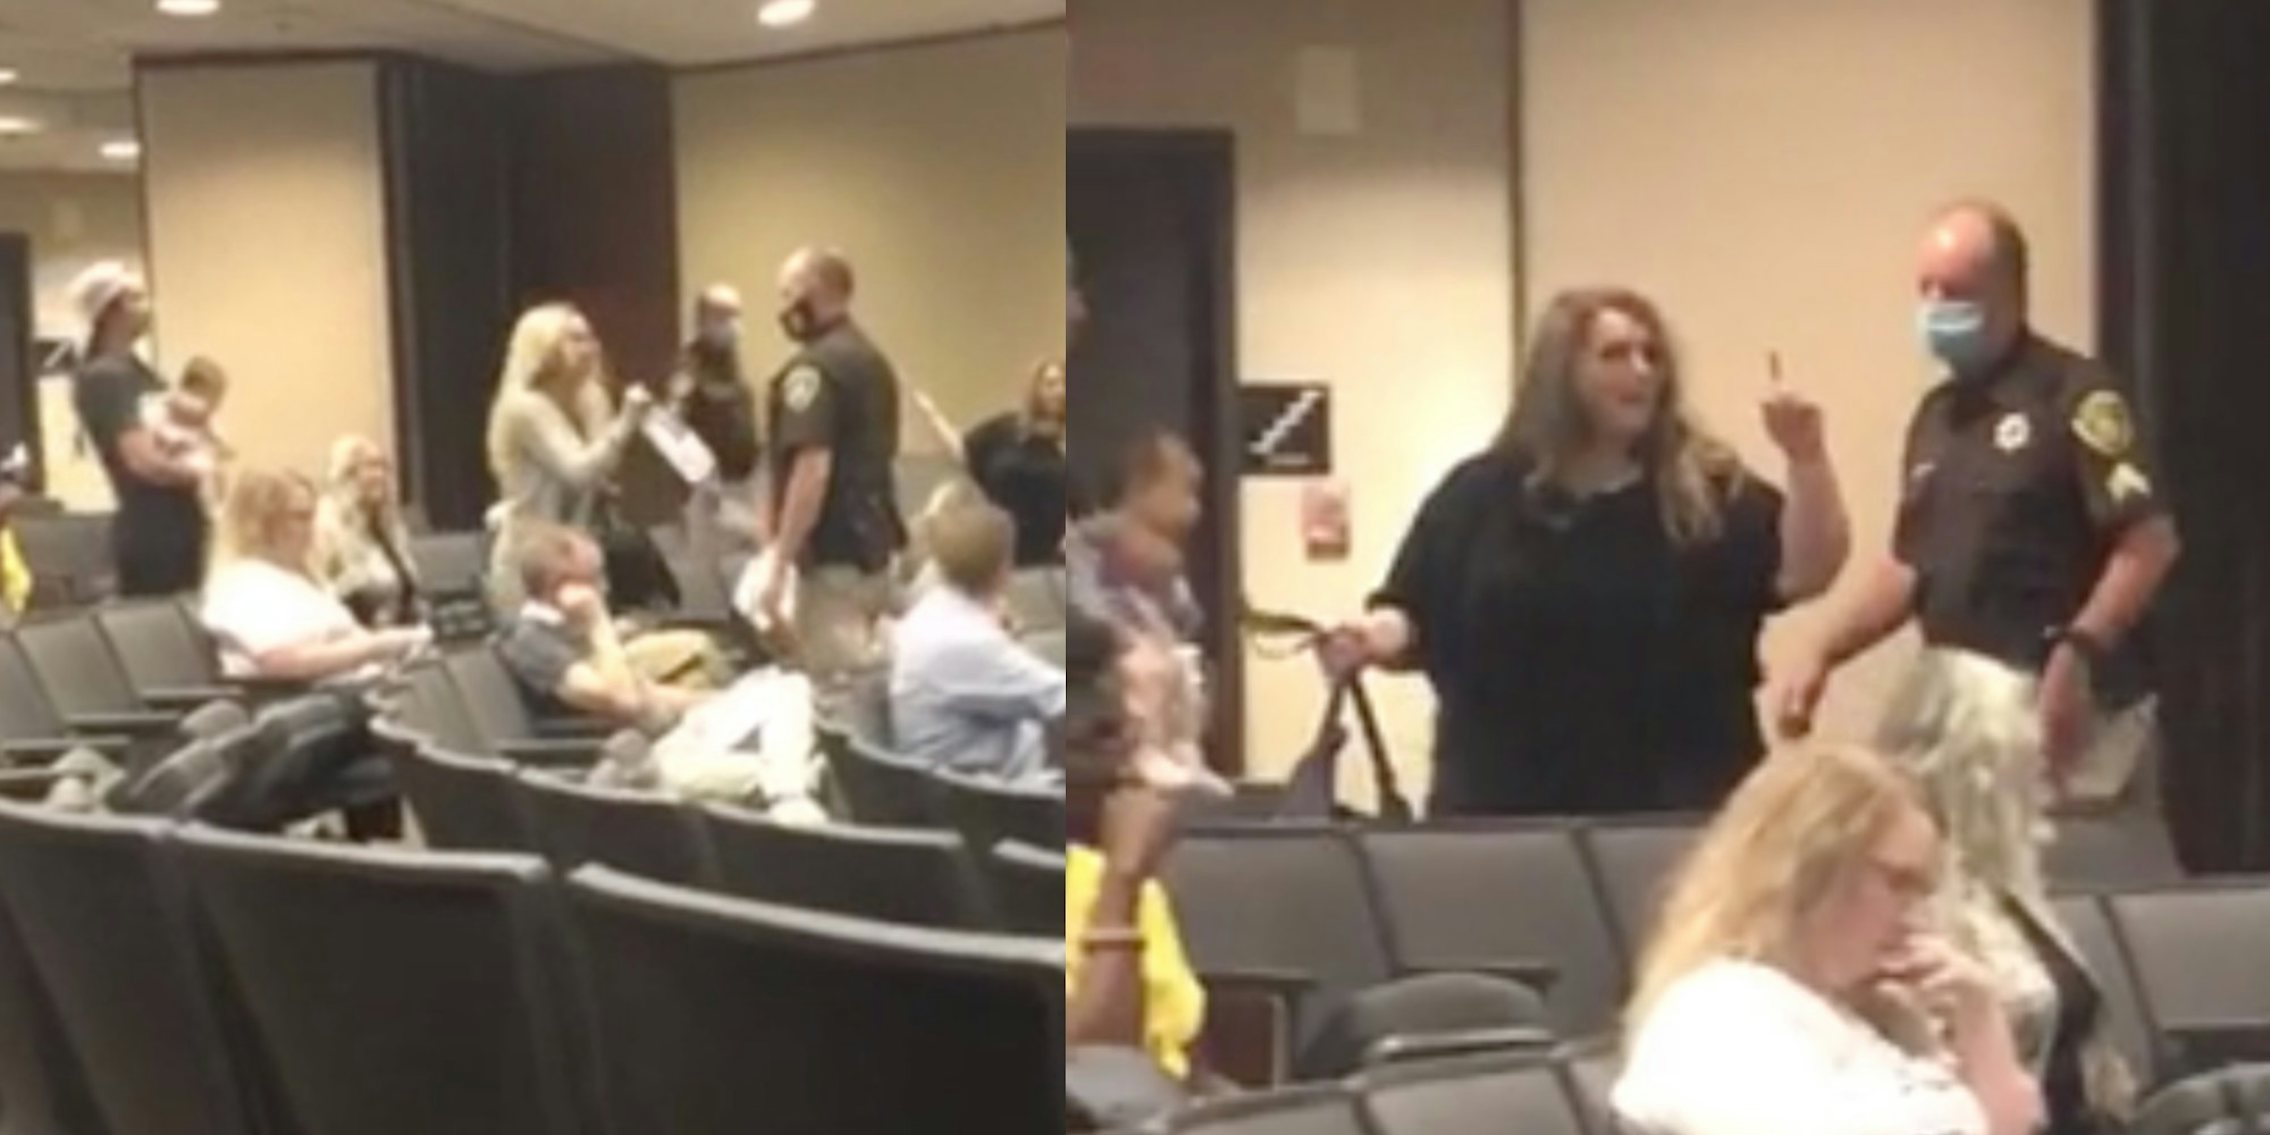 Two anti-masker Karens are escorted out of Omaha city council meeting